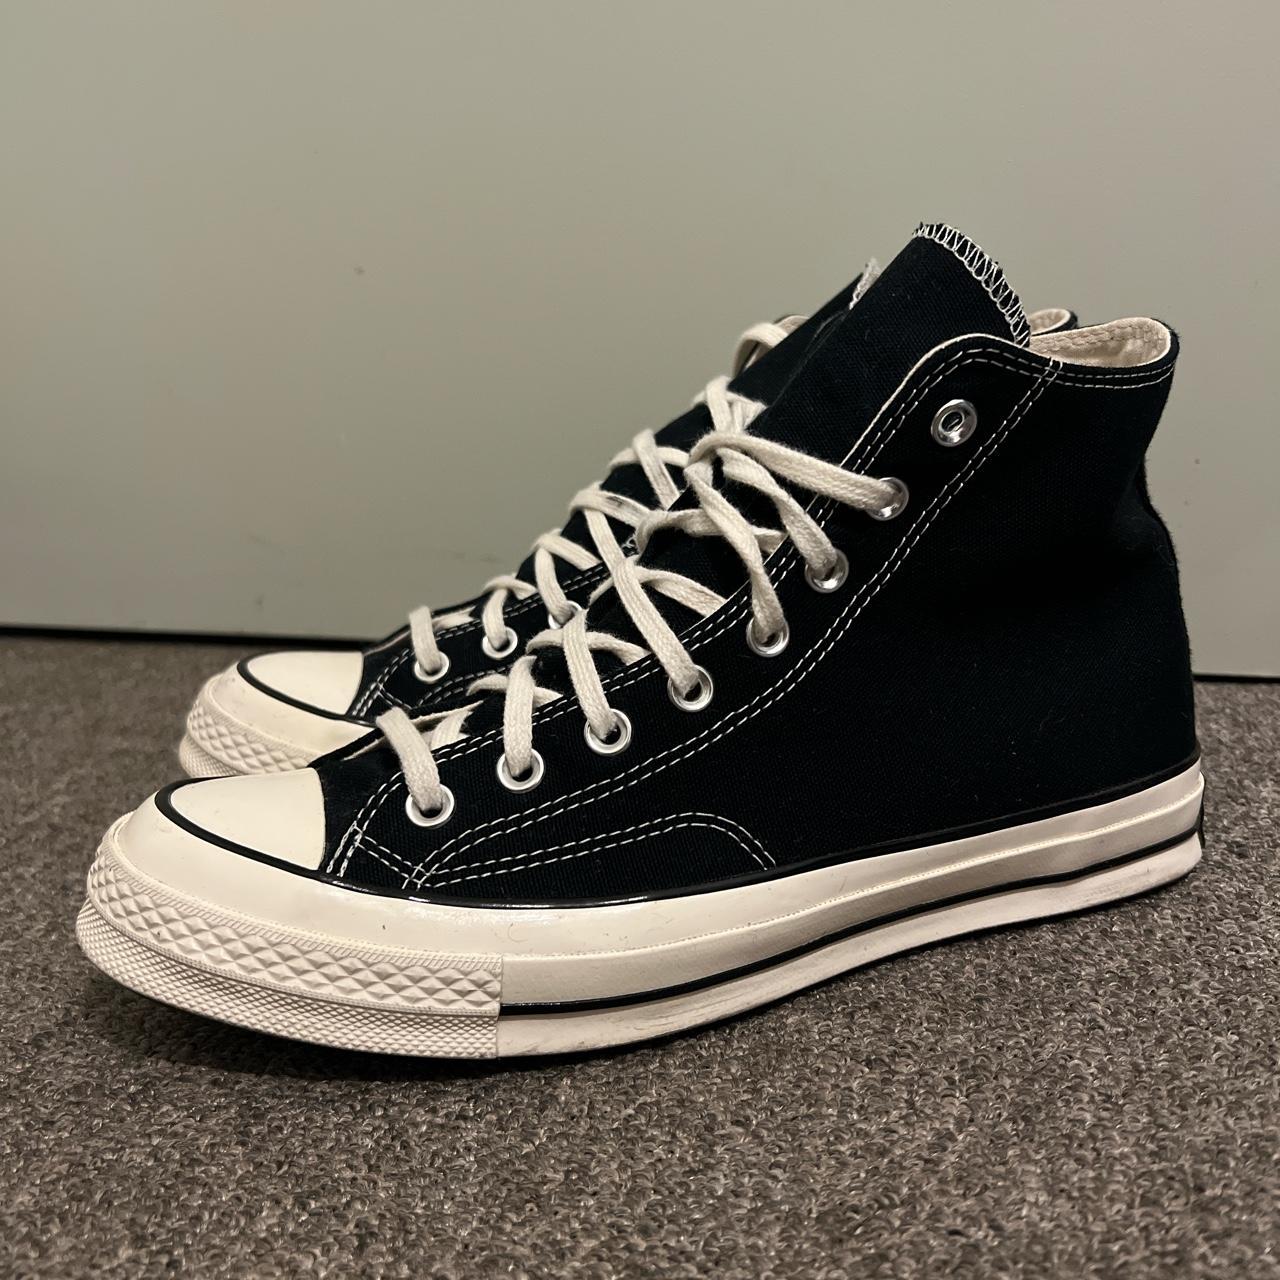 Converse Men's Black and White Trainers | Depop